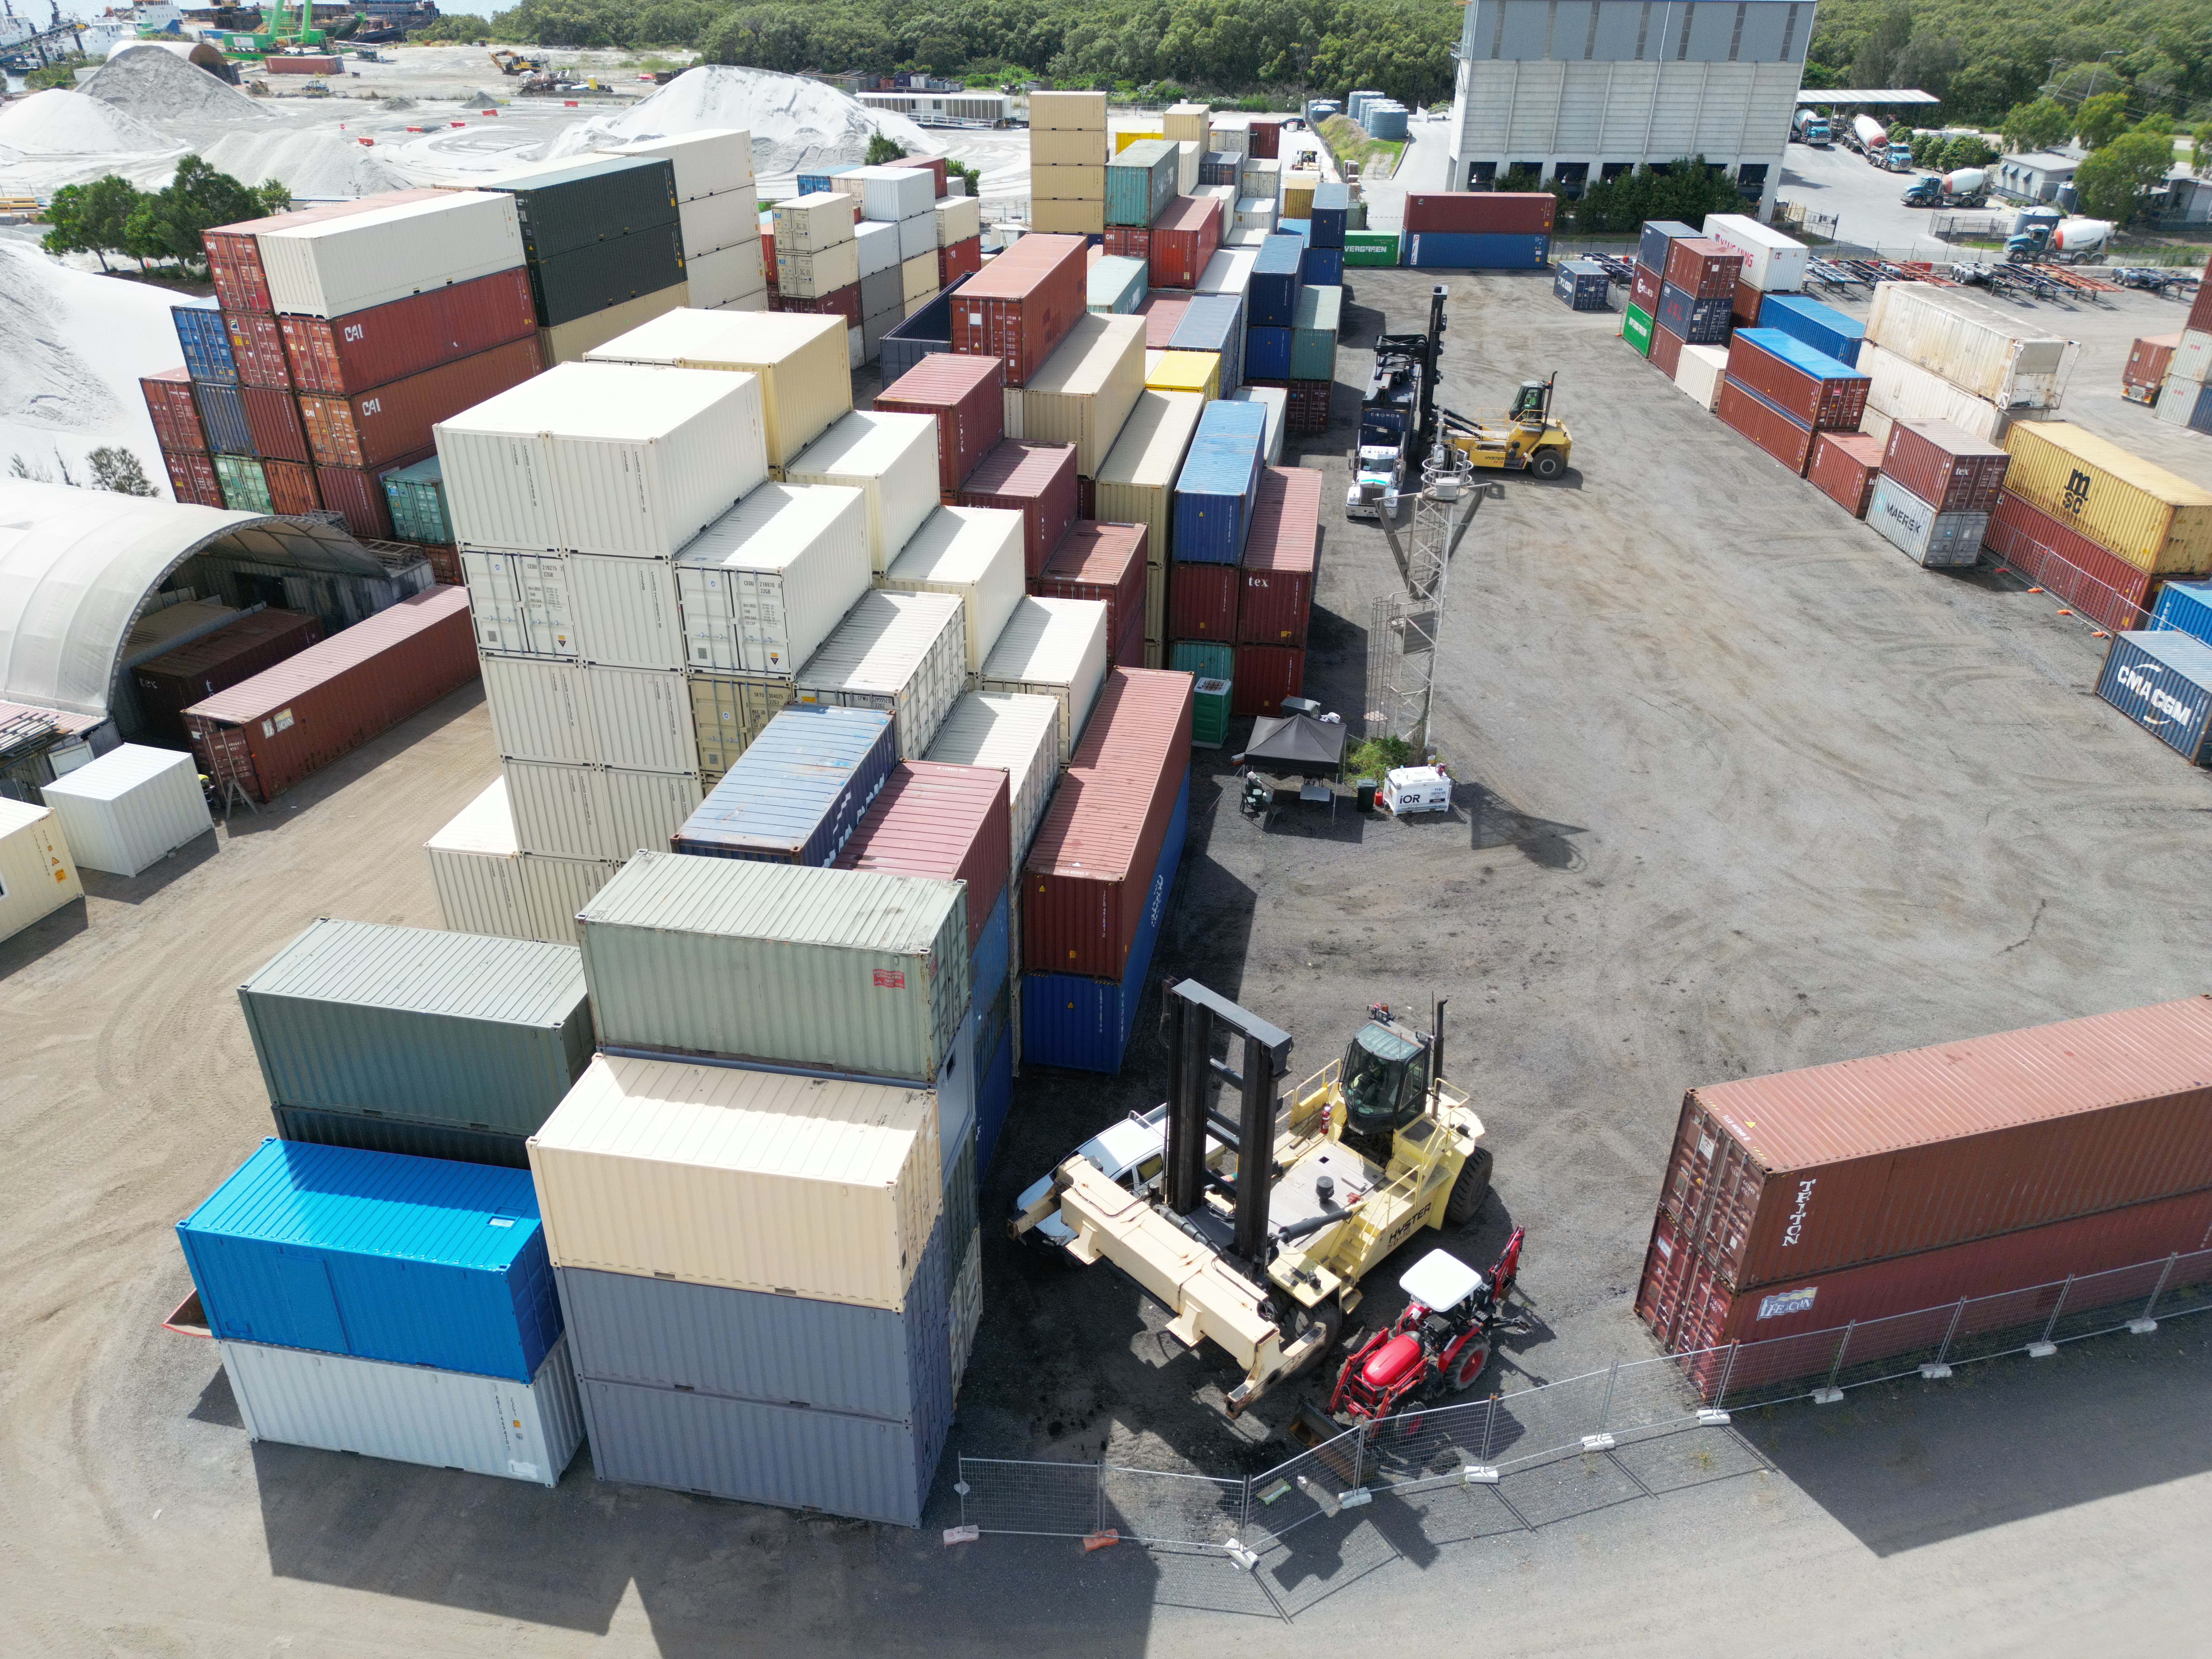 Picture of shipping containers ready for delivery in Toowoomba